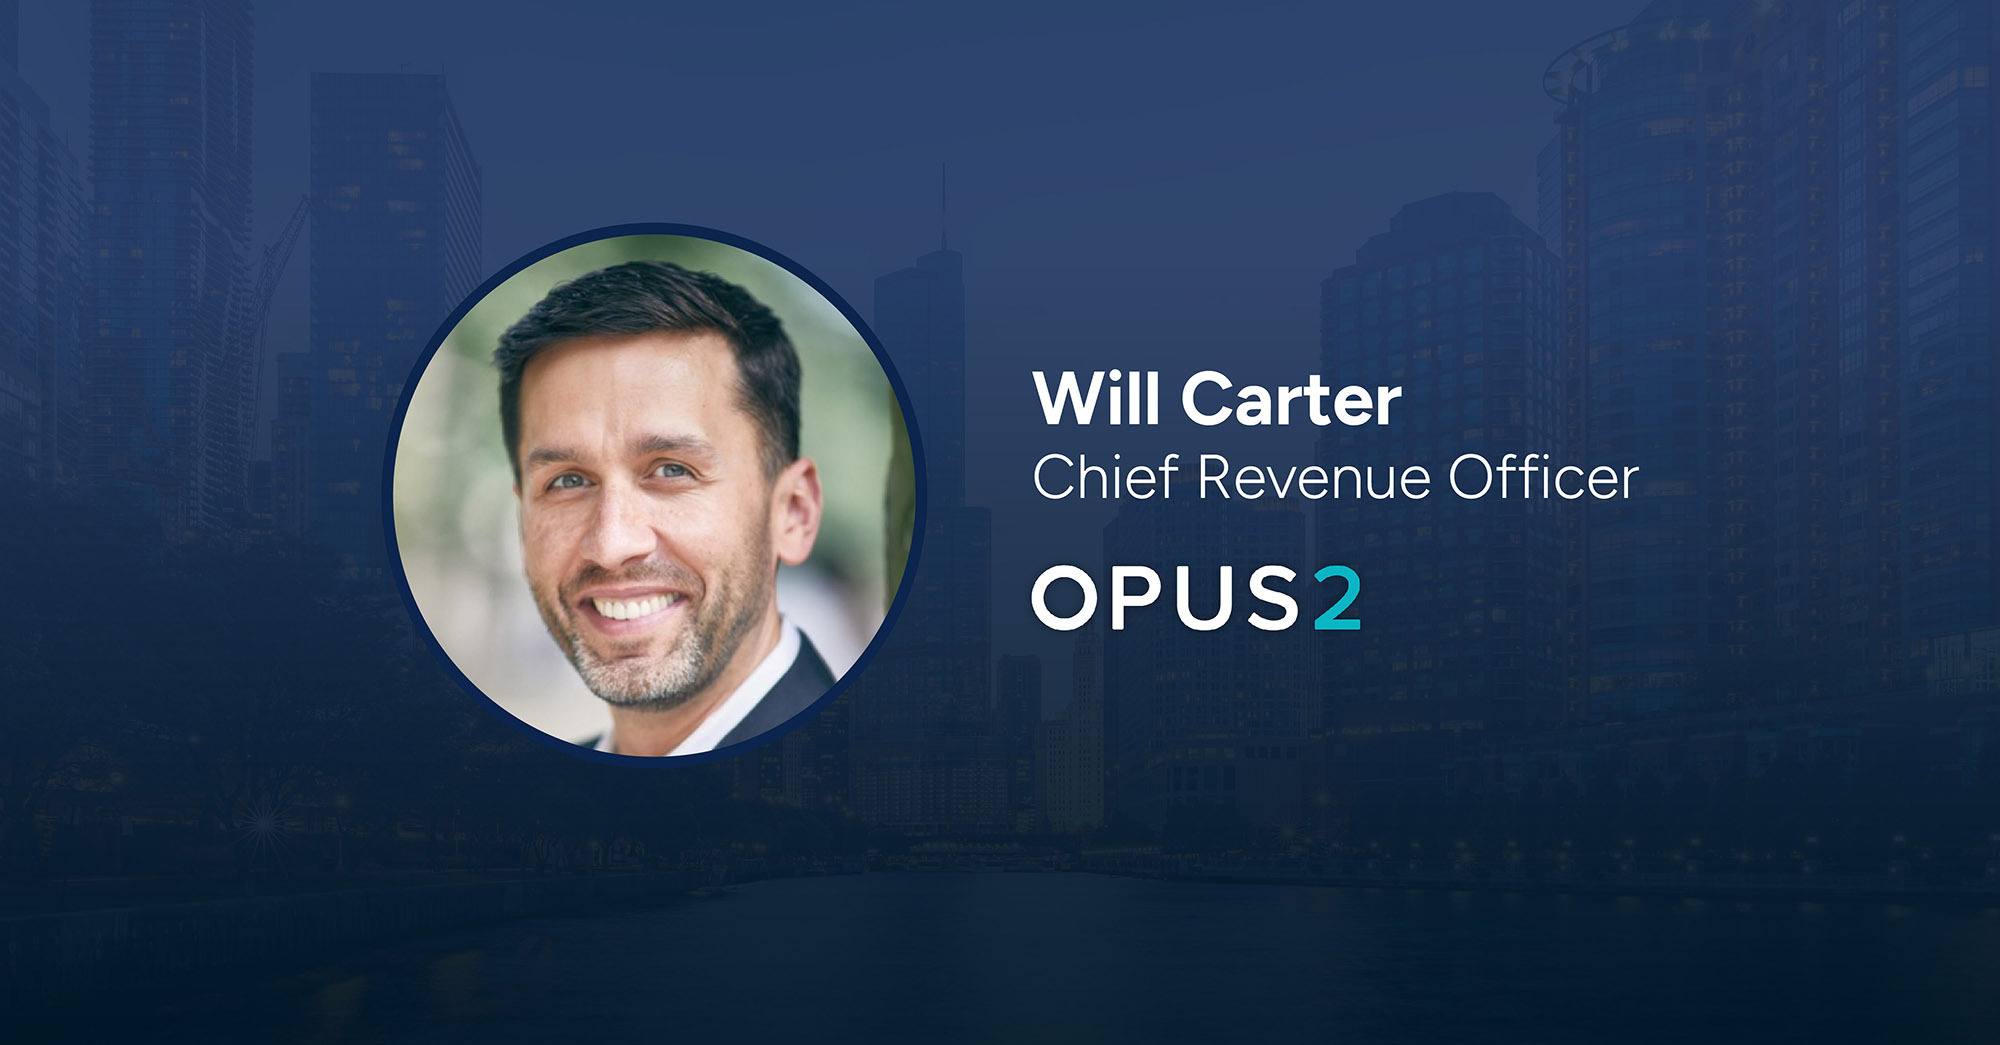 Opus 2 appoints chief revenue officer to drive growth and expansion